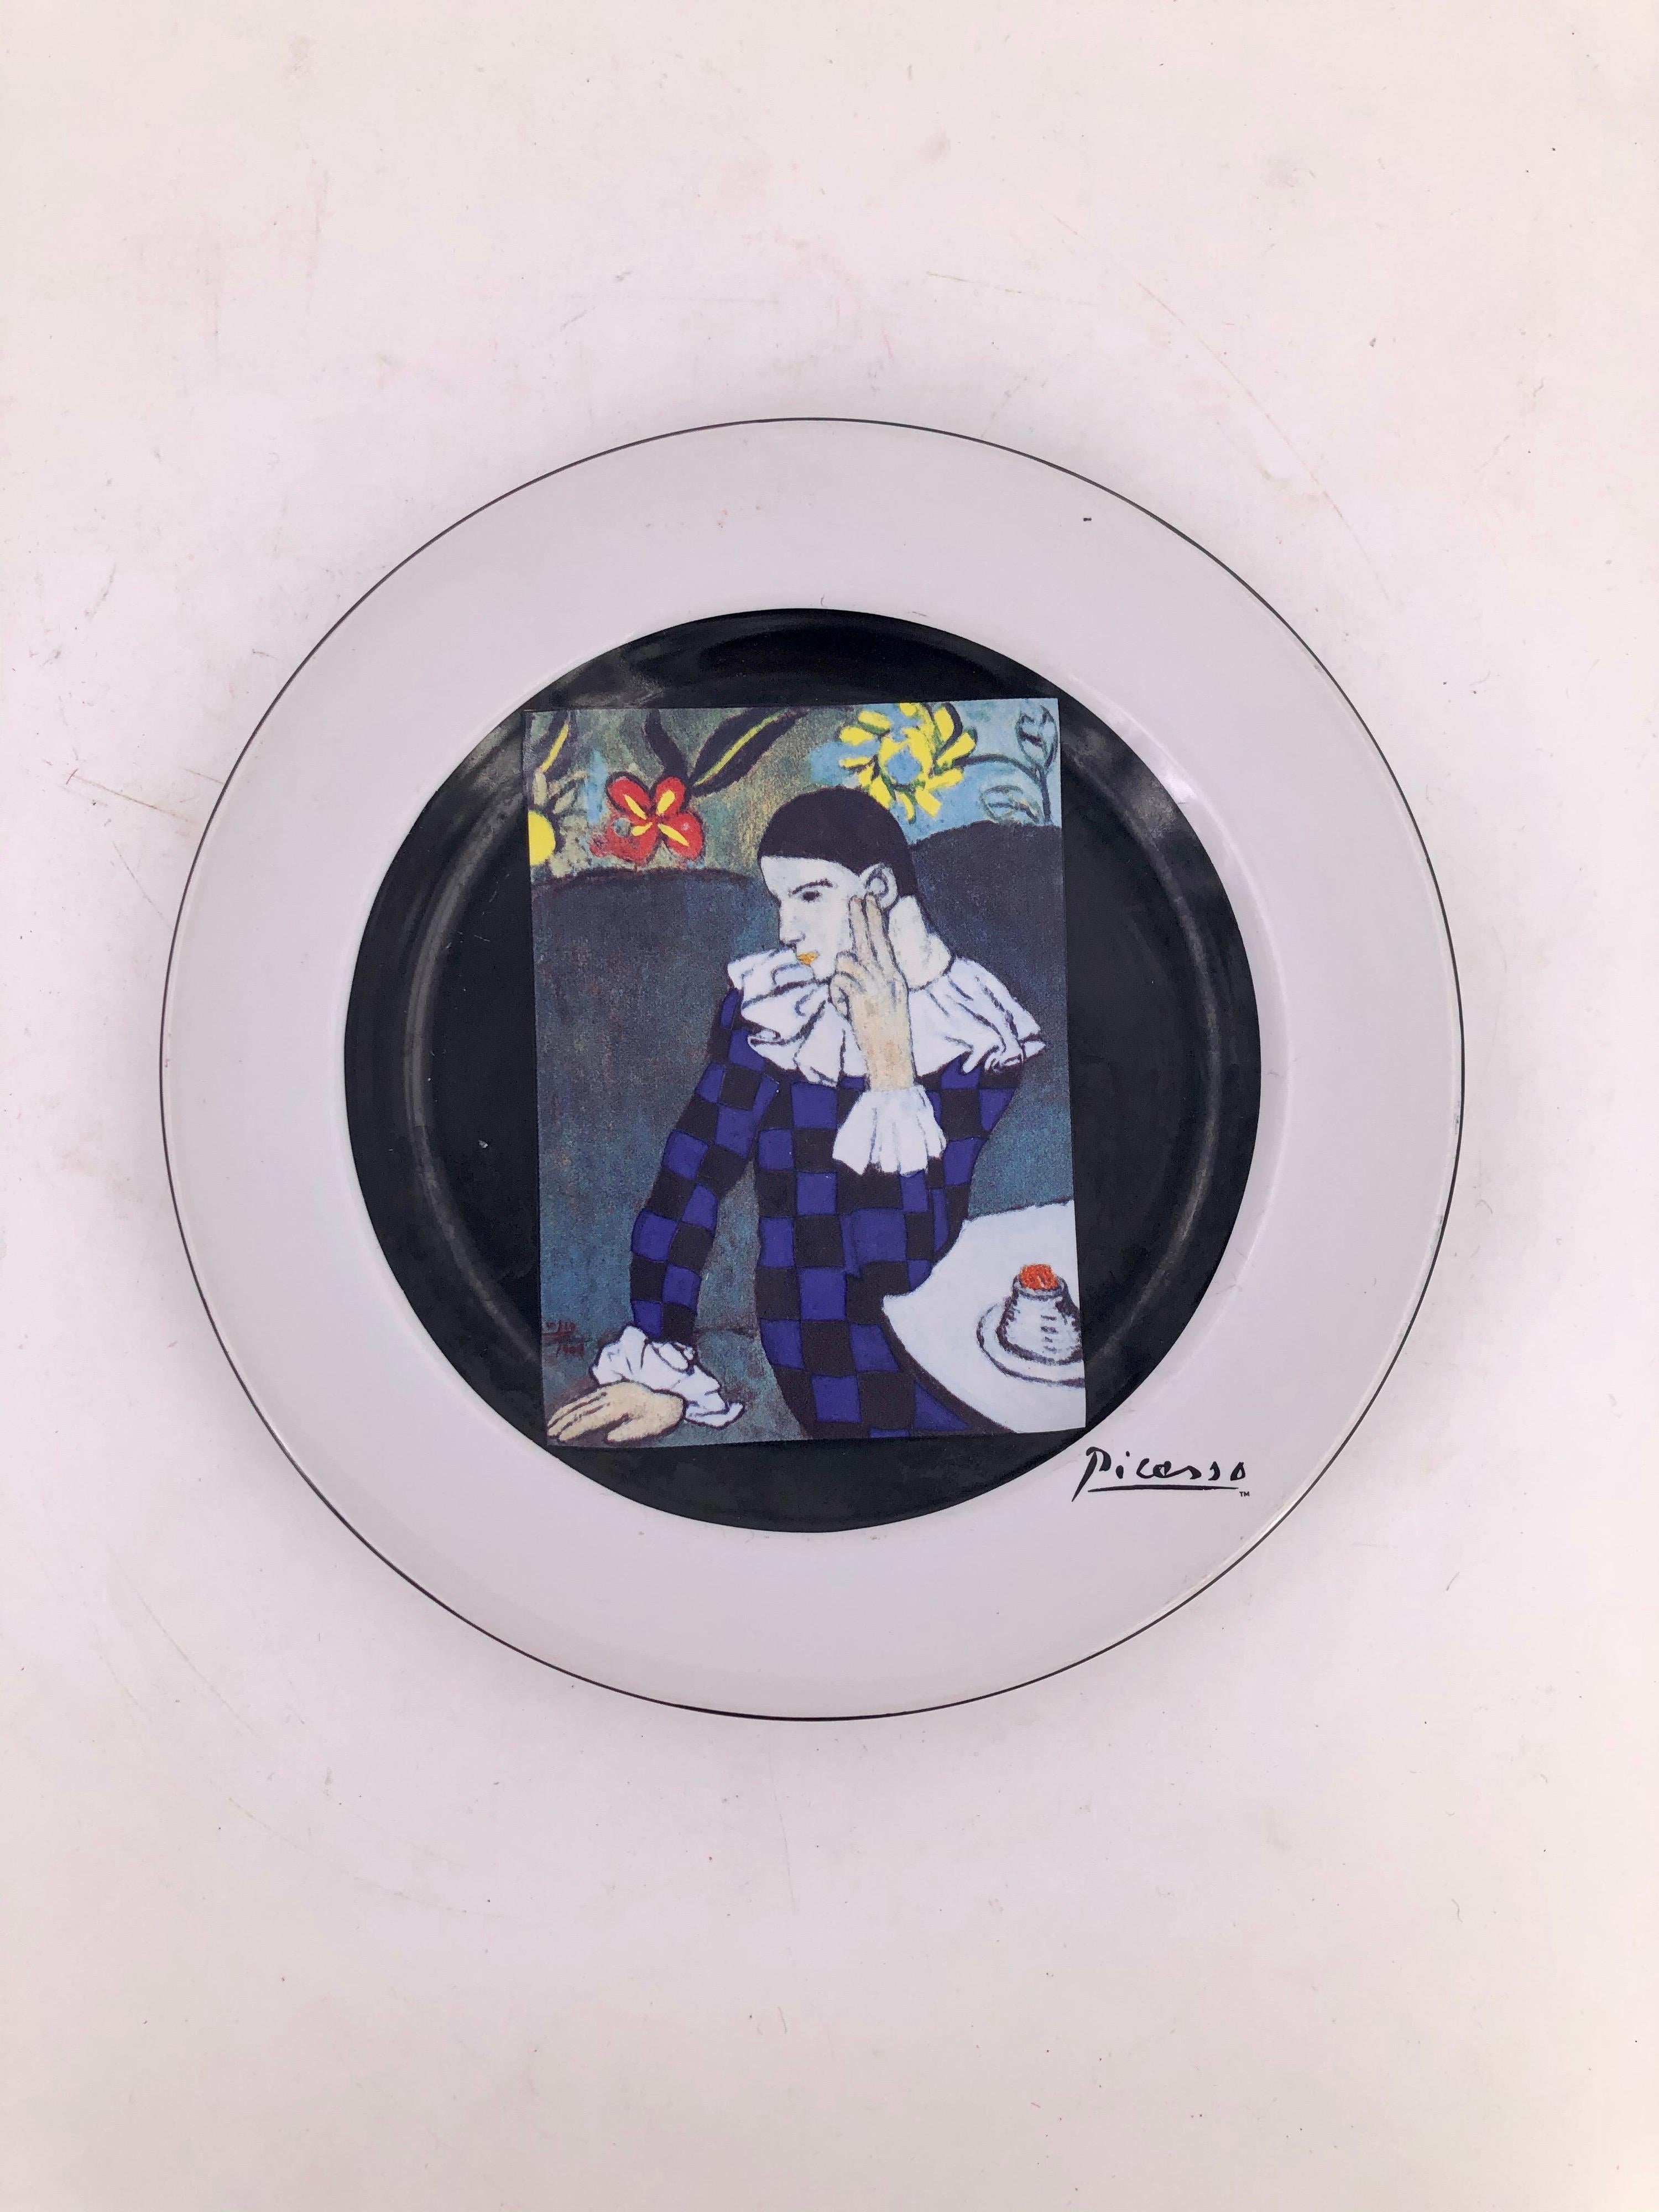 1996 Picasso Living, decorative plate from his painting 